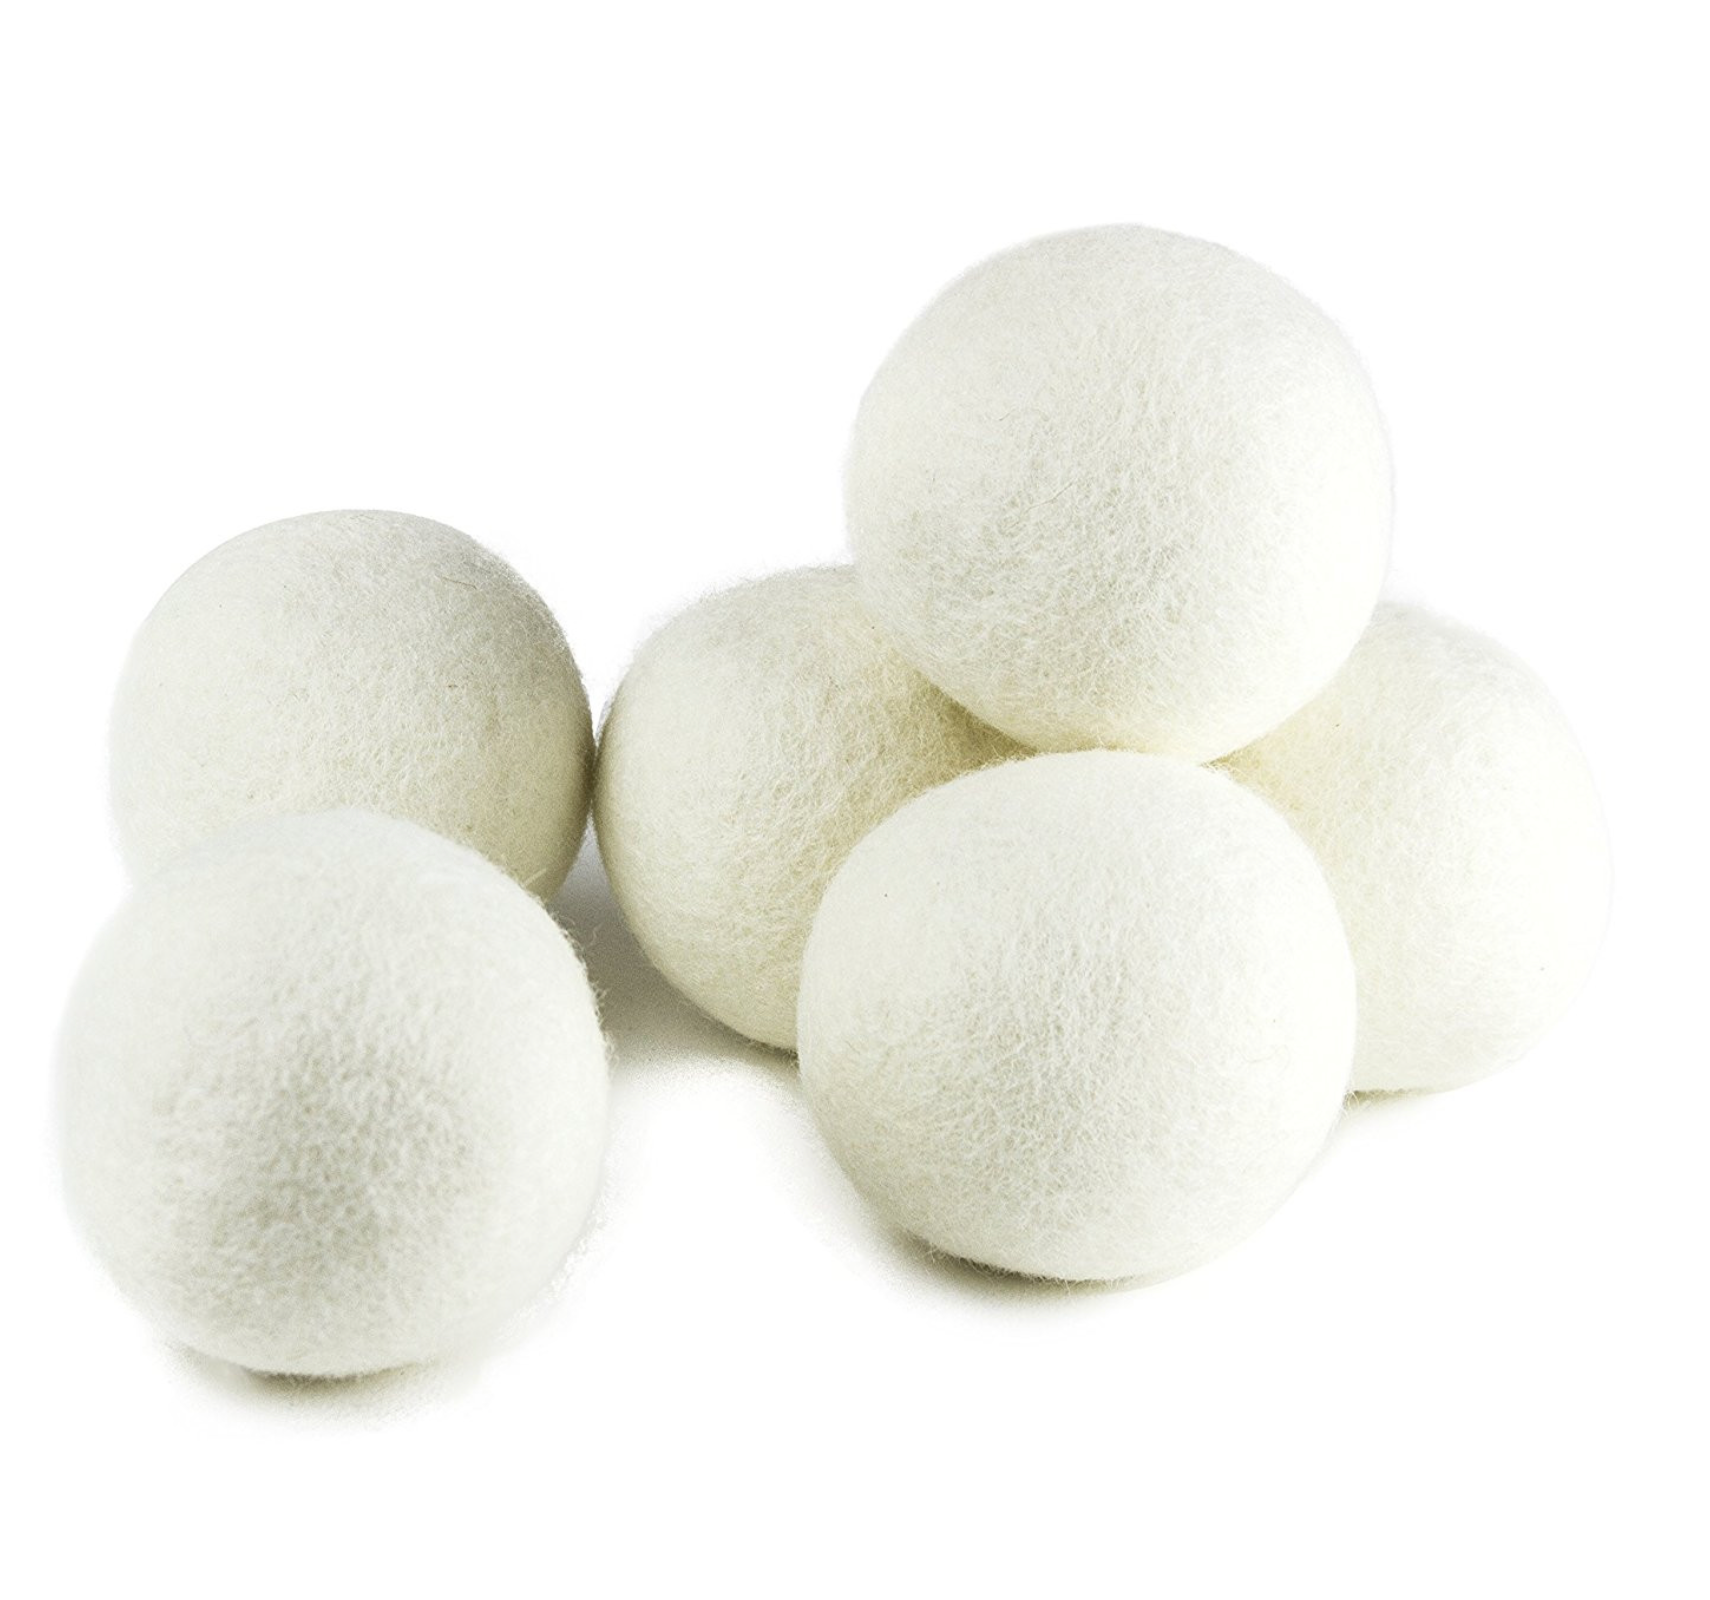 Plant Therapy Wool Dryer Balls 6 Pack and Sparkling Laundry Blend 3 Pack